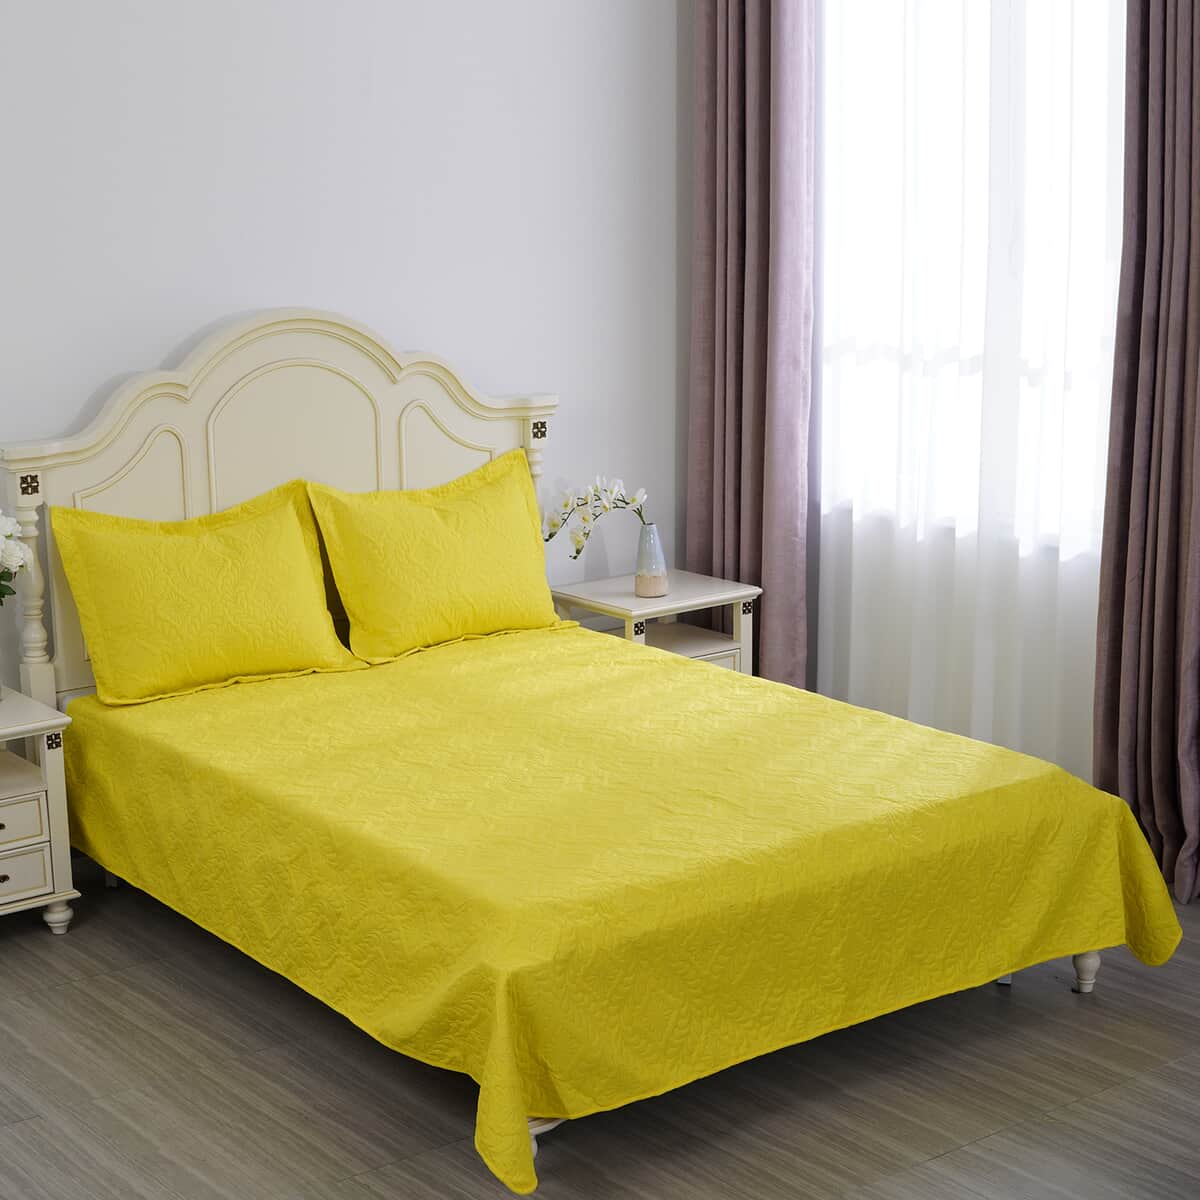 Homesmart 3 Pcs Solid Yellow Pinsonic Quilt Bedding Set - King Size image number 0